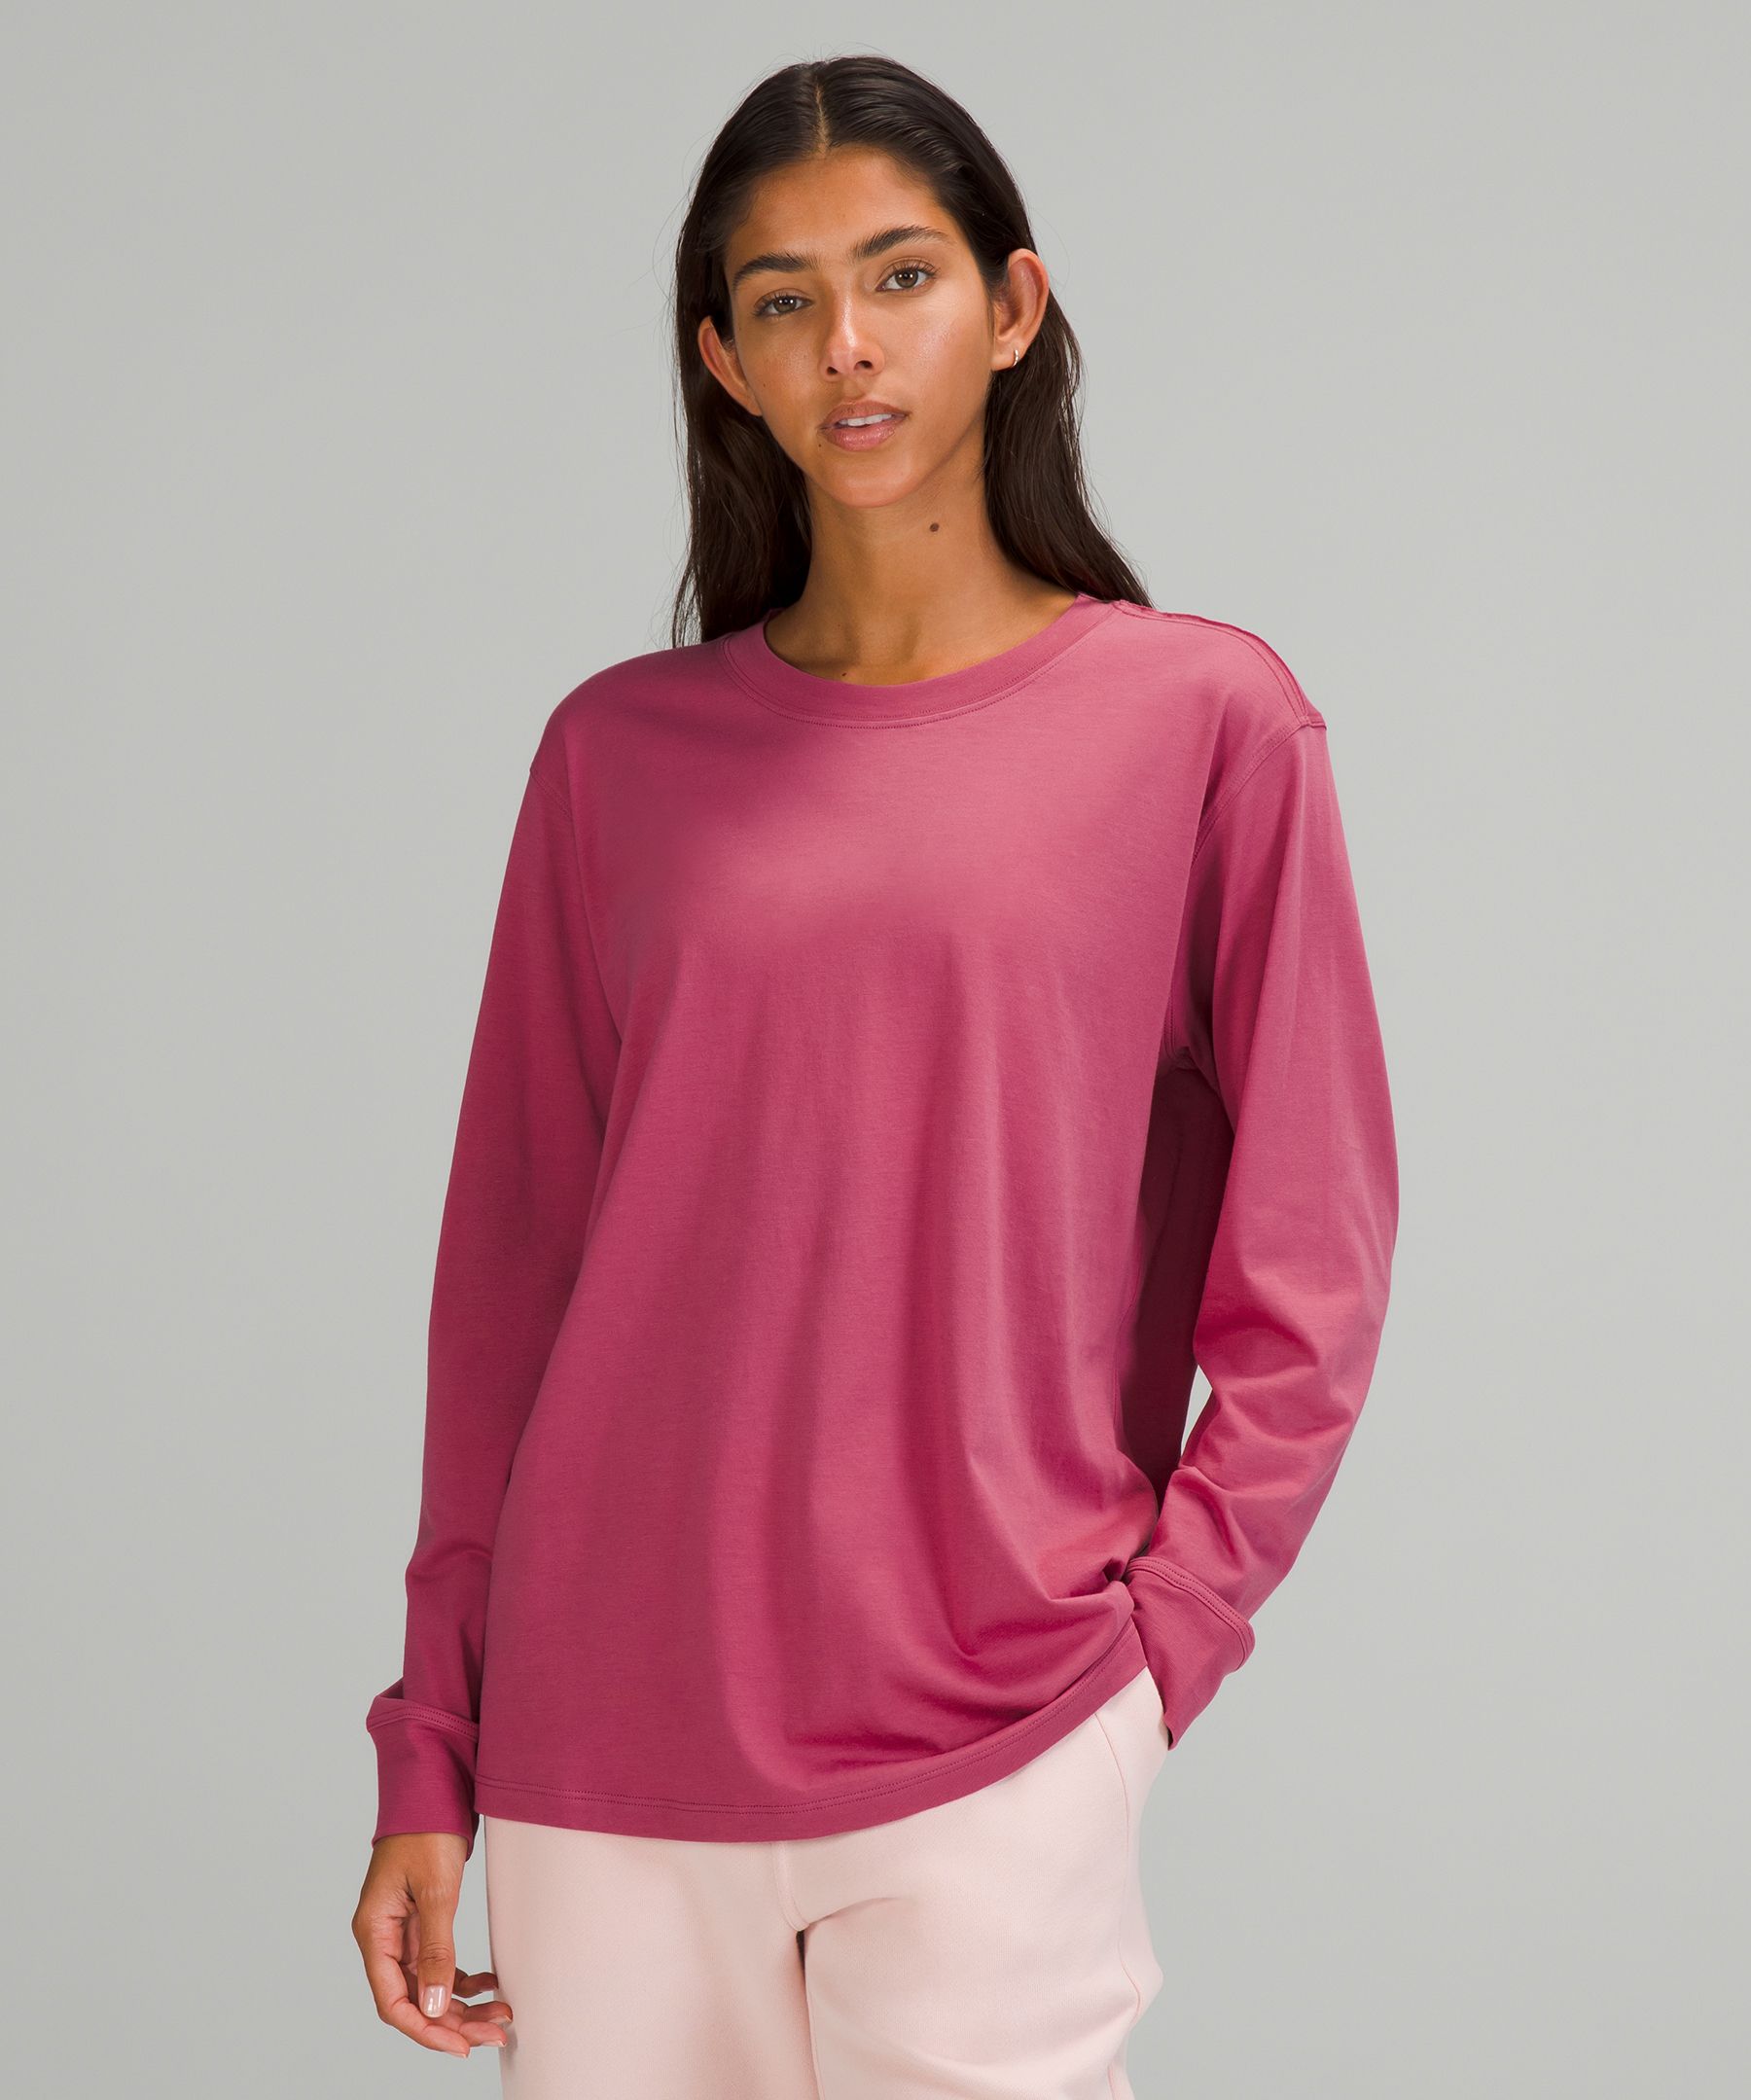 Lululemon All Yours Long Sleeve Shirt In Pink Lychee